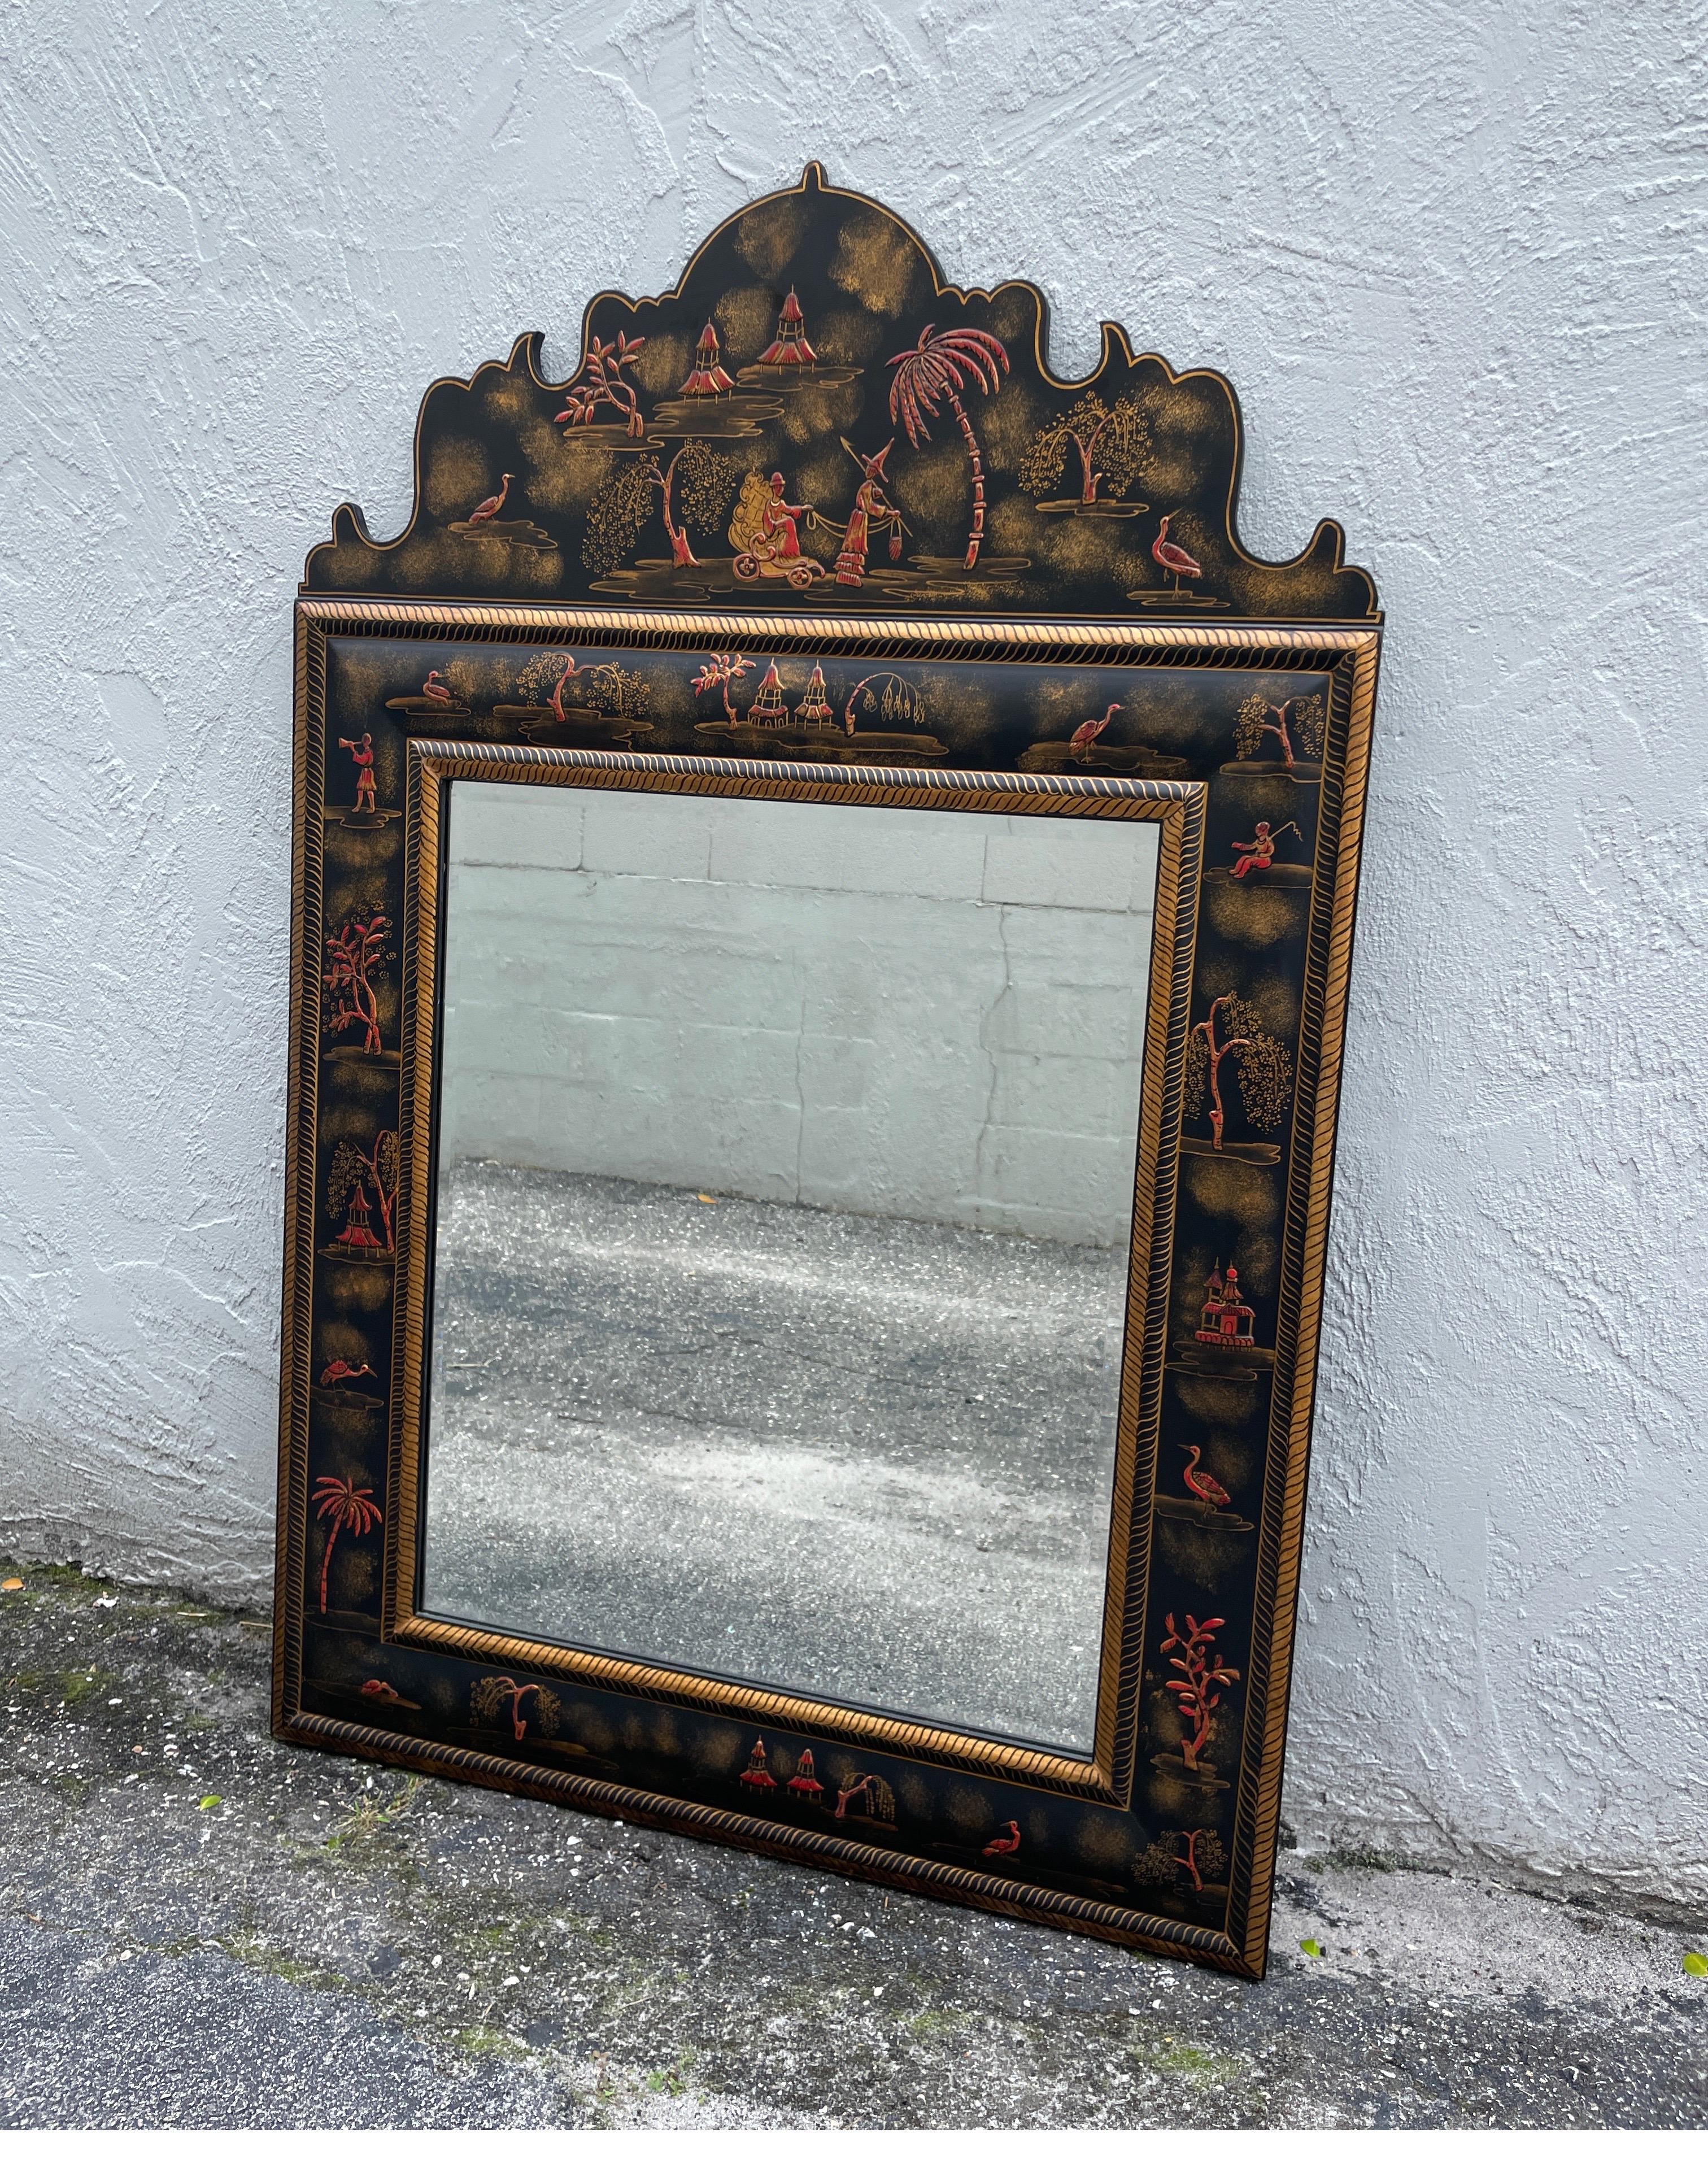 Vintage large Pagoda style chinoiserie mirror in black, red & gold. Very impressive scale with great detail in the design.